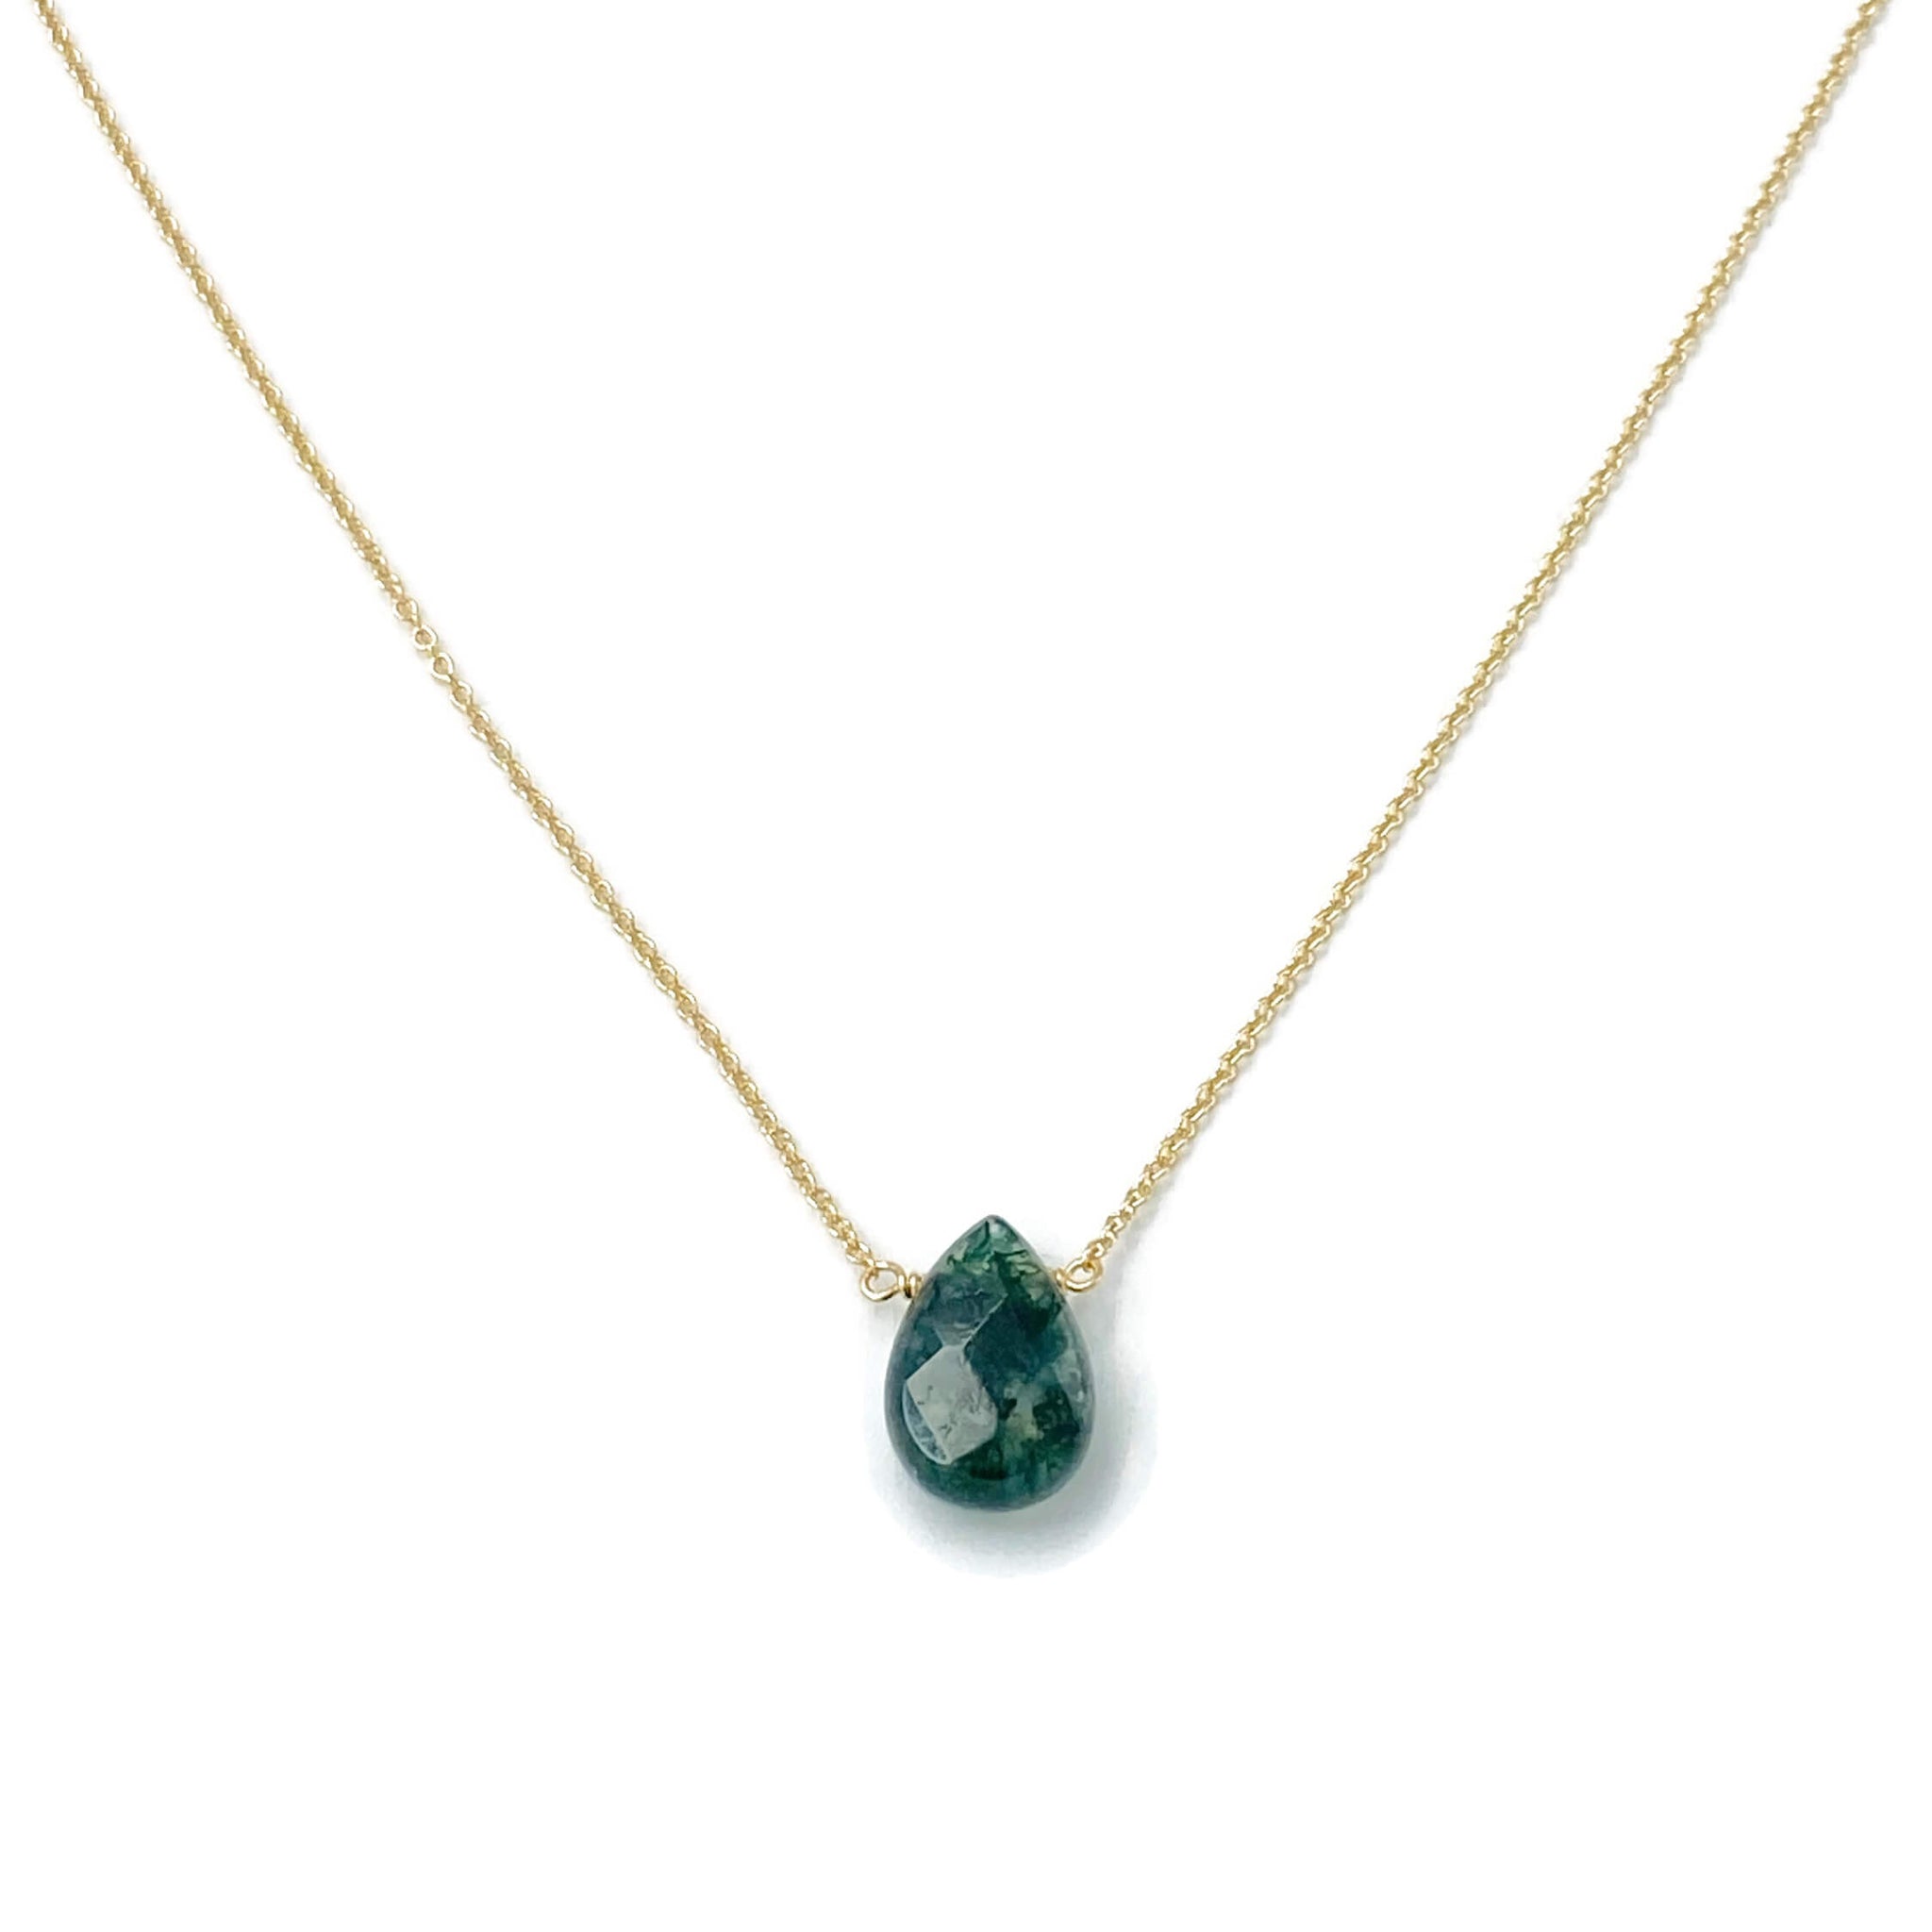 This green moss necklace is made with a single green moss agate gemstone. The stone is named for its earthy greenish color and although ‘moss’ is in the name, the stone actually comes from the ancient volcanoes.